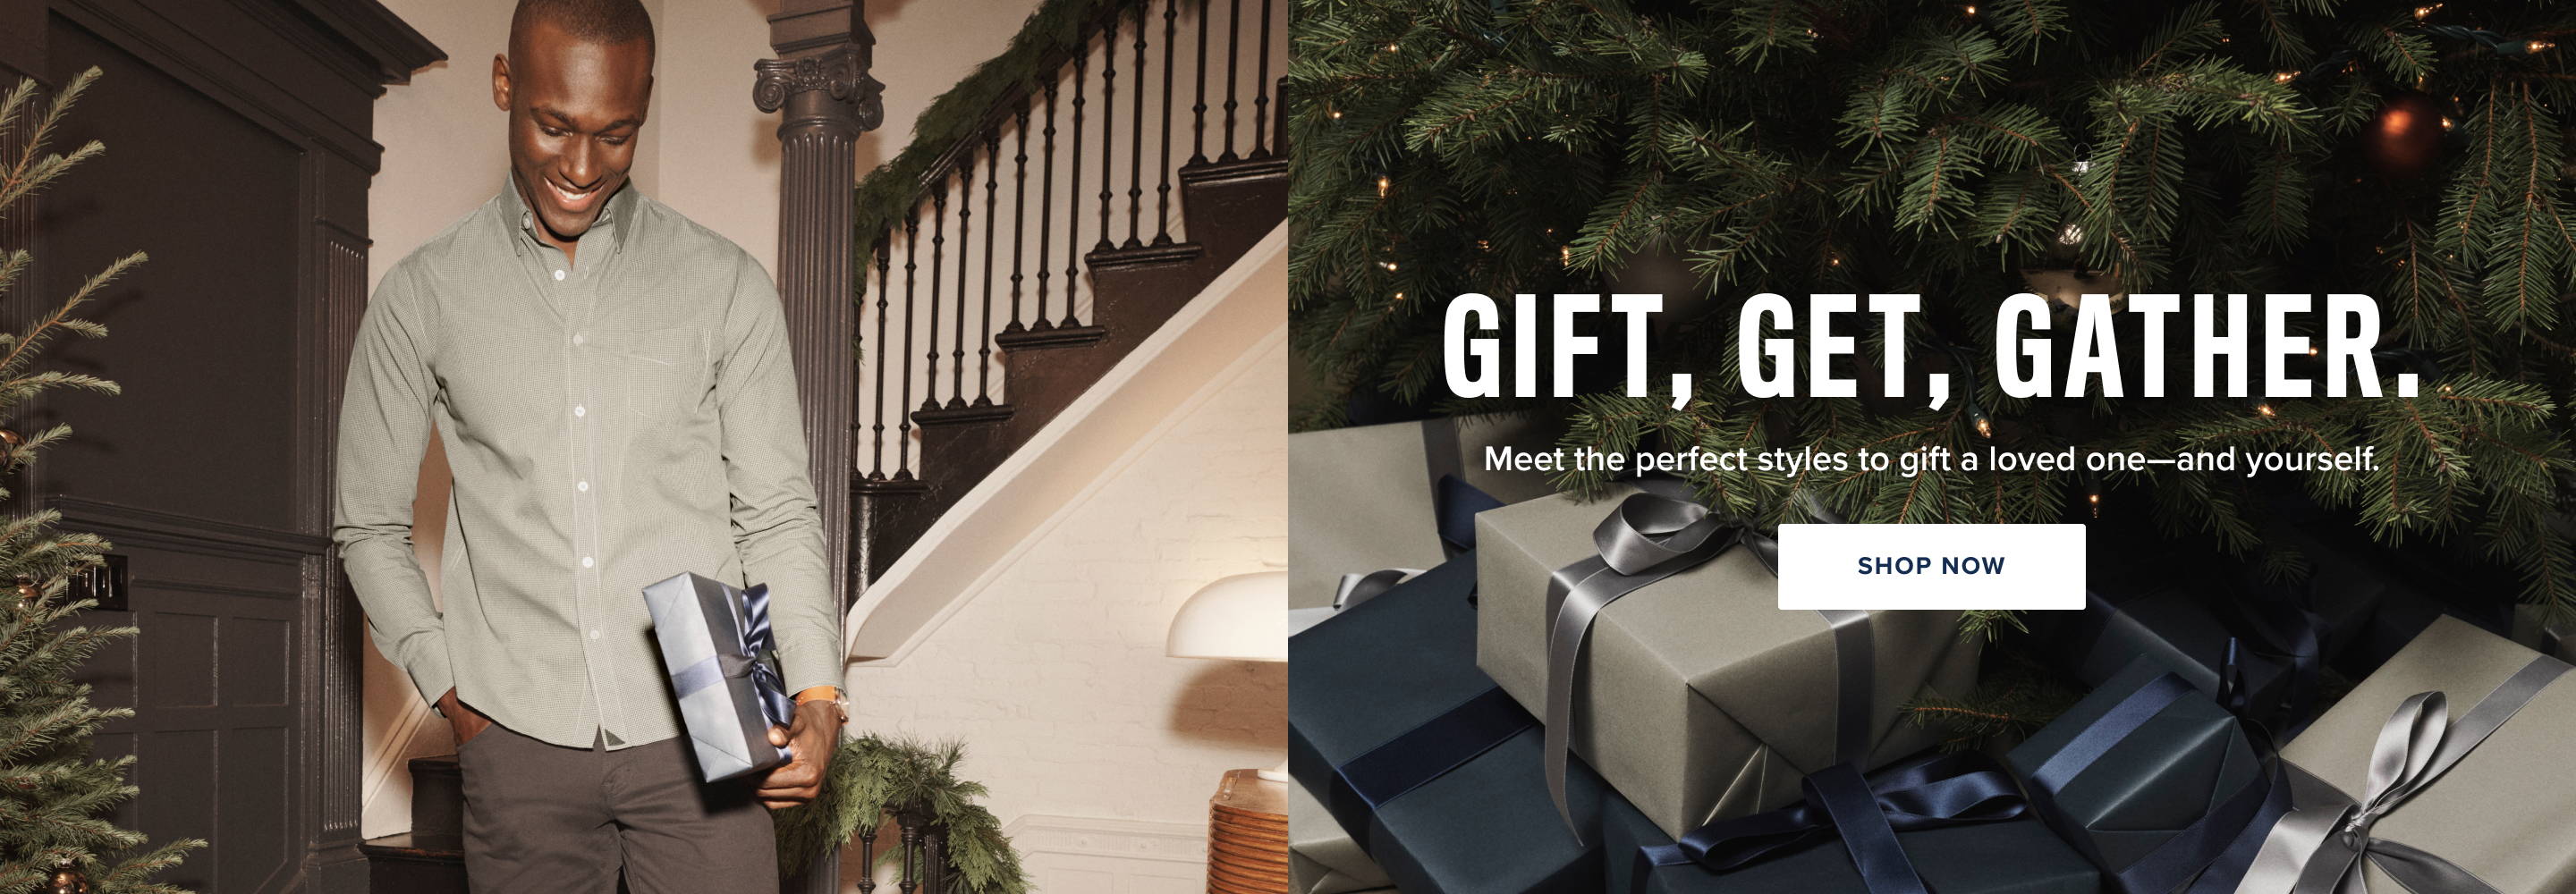 Gift, get, gather. Meet the perfect styles to gift a loved one — and yourself.